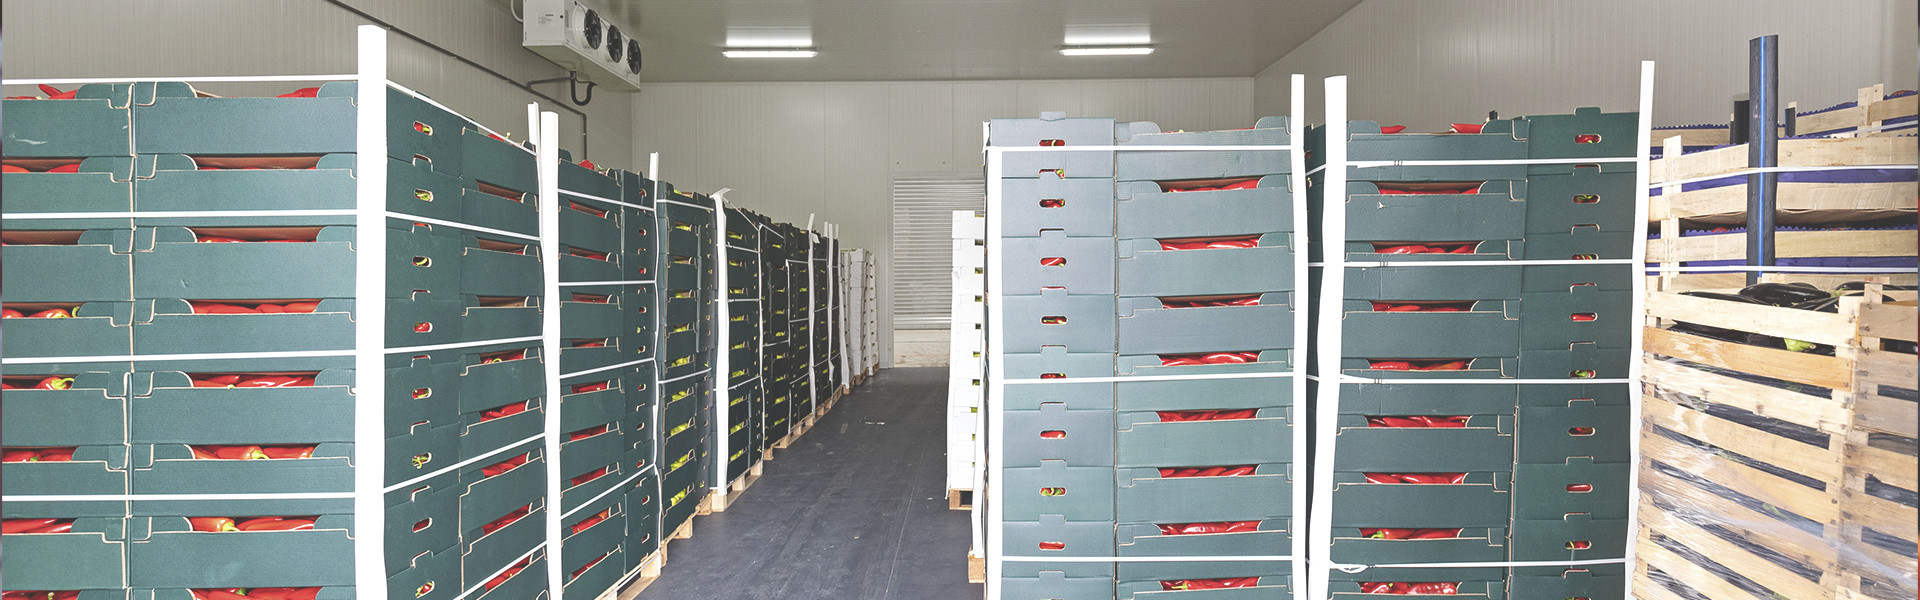 Controlled atmosphere in fruits and vegetables storage rooms